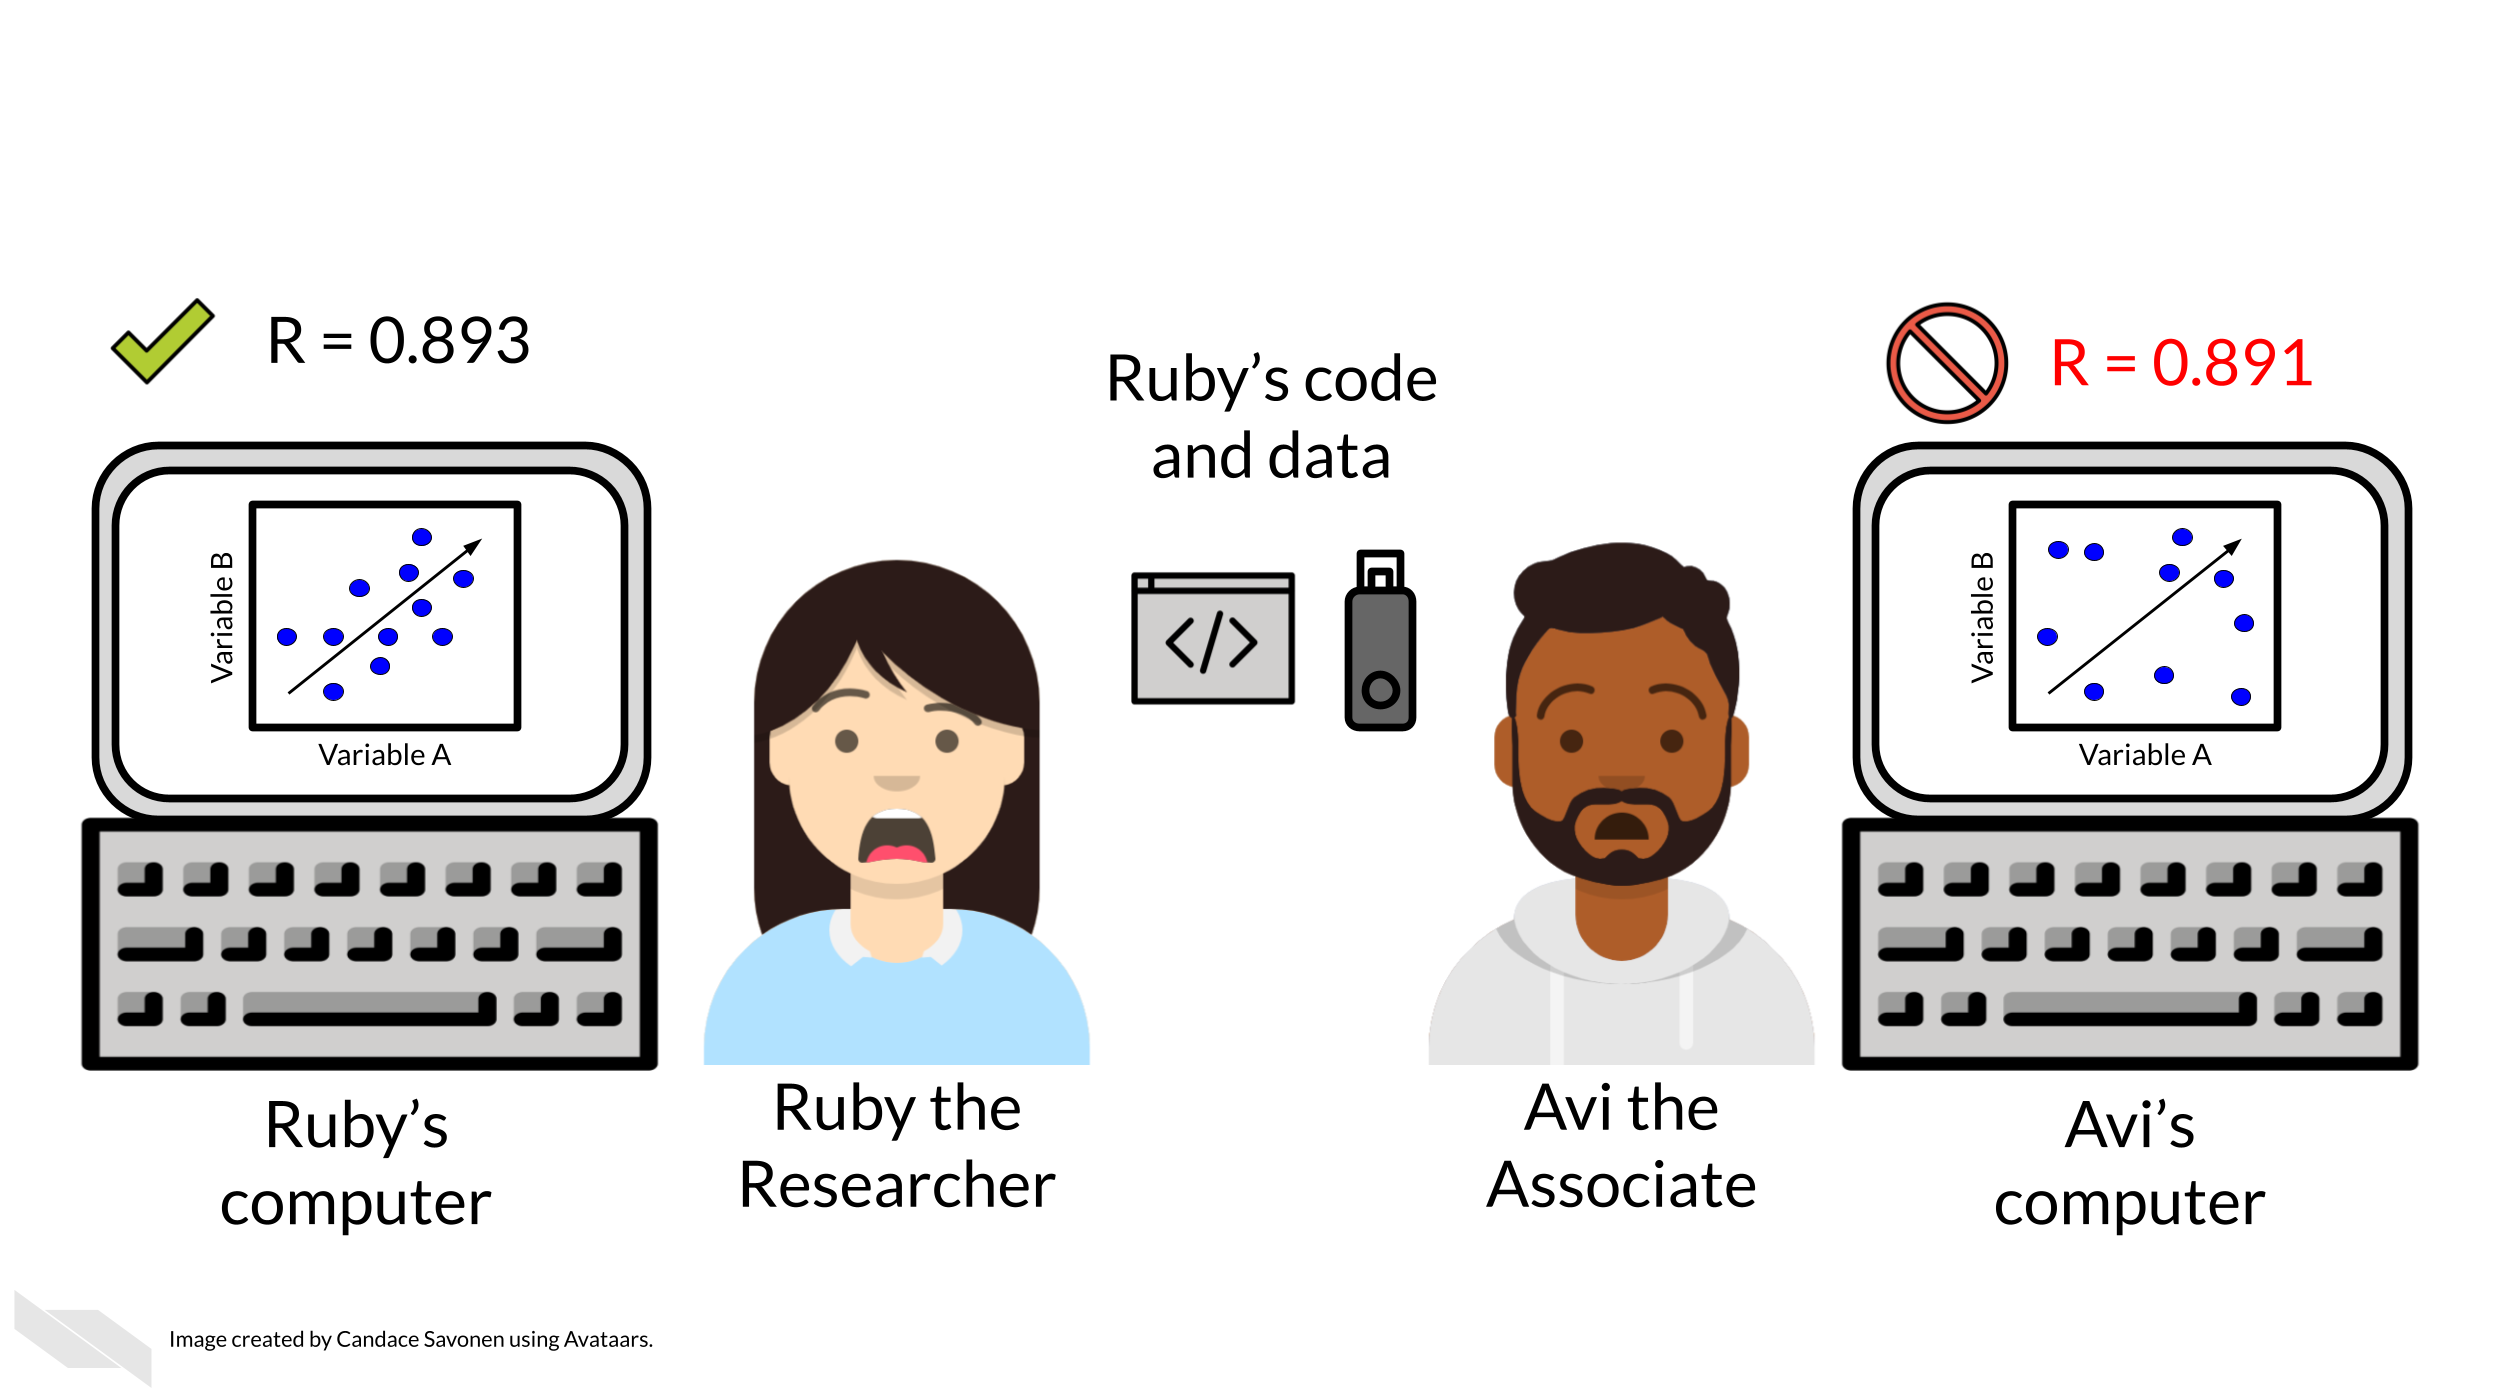 Ruby the researcher and Avi the associate are both very confused and slightly horrified that they both ran the same code and data but received different results.